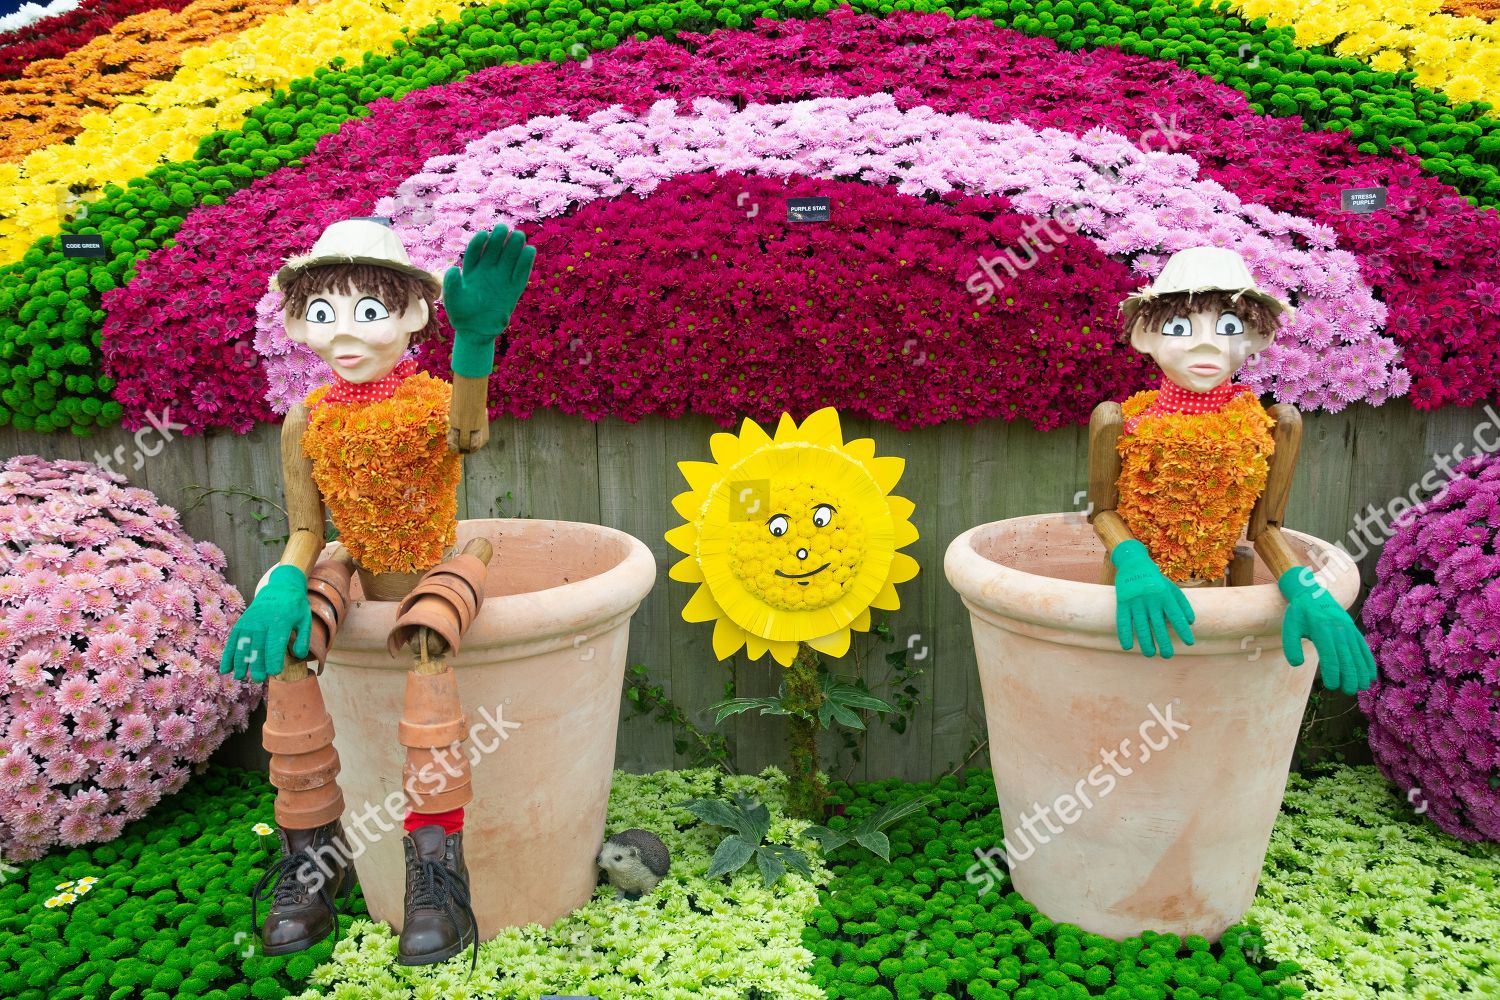 Bill Ben Chrysanthemums Final Preparations By Exhibitors Rhs Editorial Stock Photo Stock Image Shutterstock